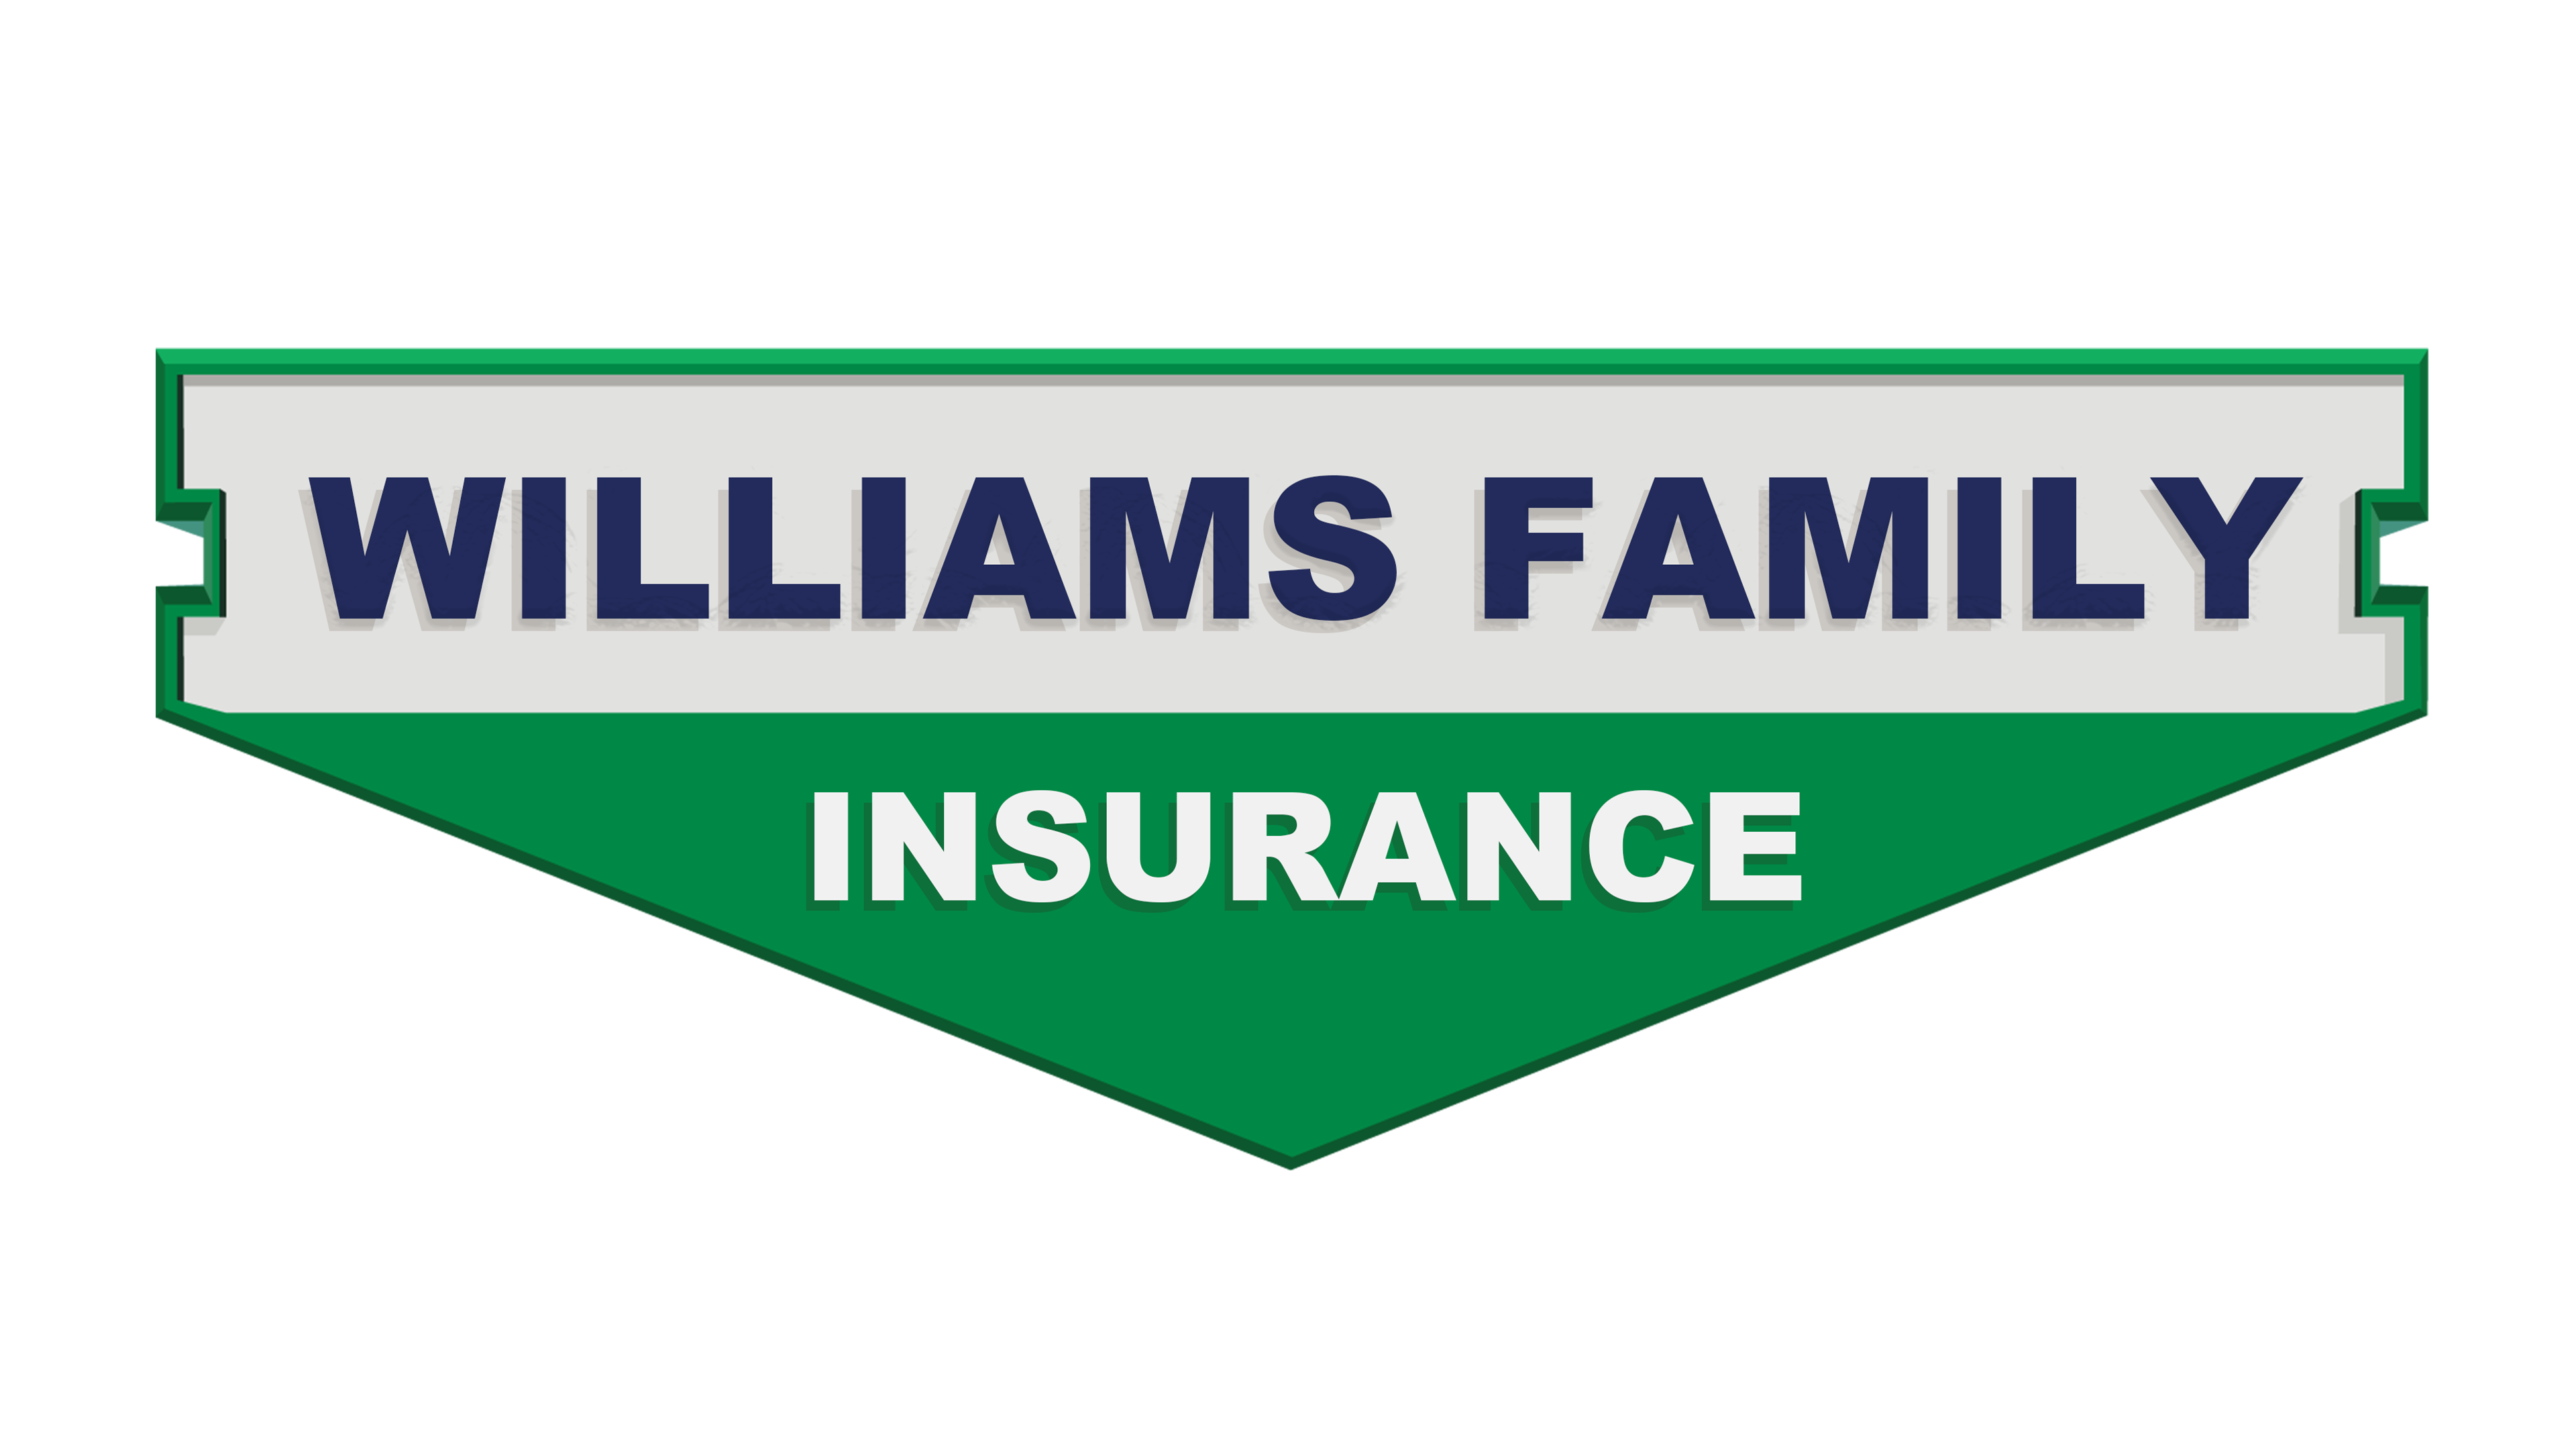 Willams Family Insurance in Mt Orab, OH - Mt Orab Ford Inc